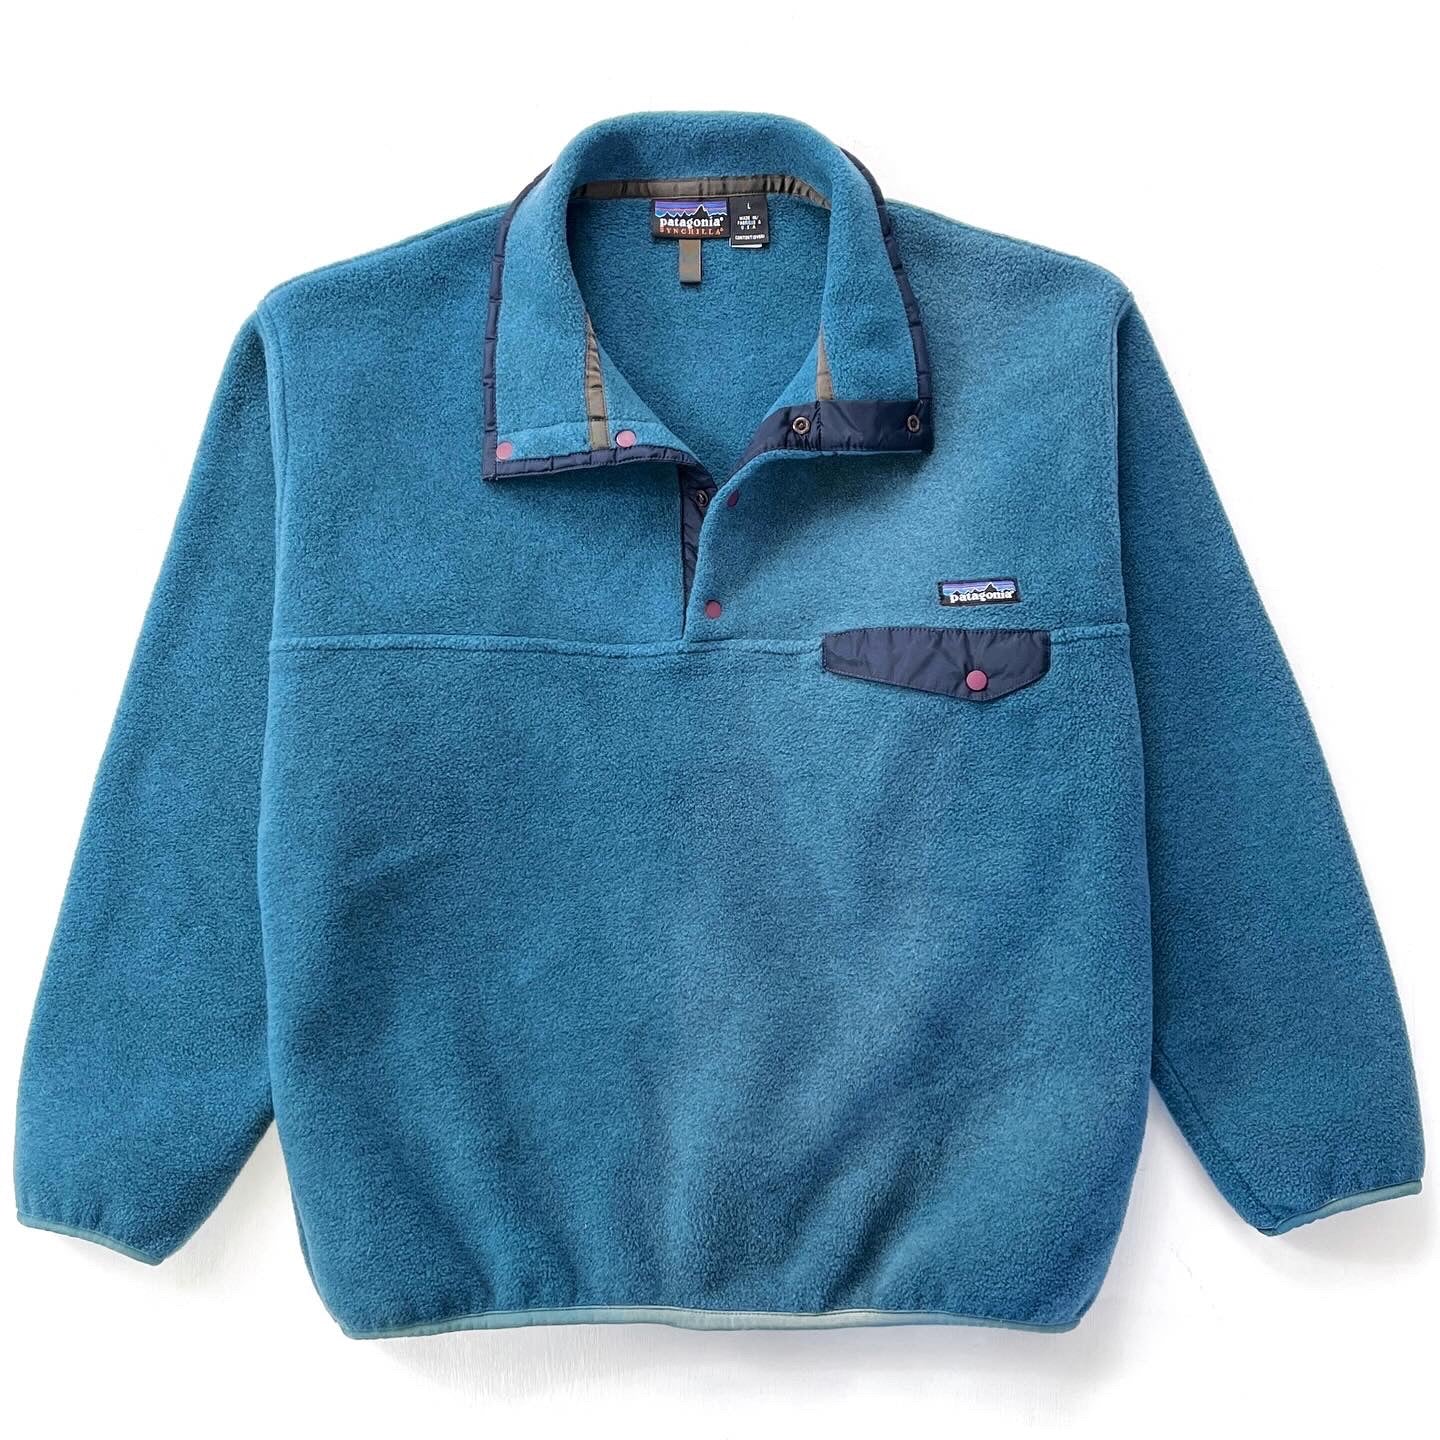 2001 Patagonia Made In The U.S.A. Synchilla Snap-T, Atlantic Blue (L)